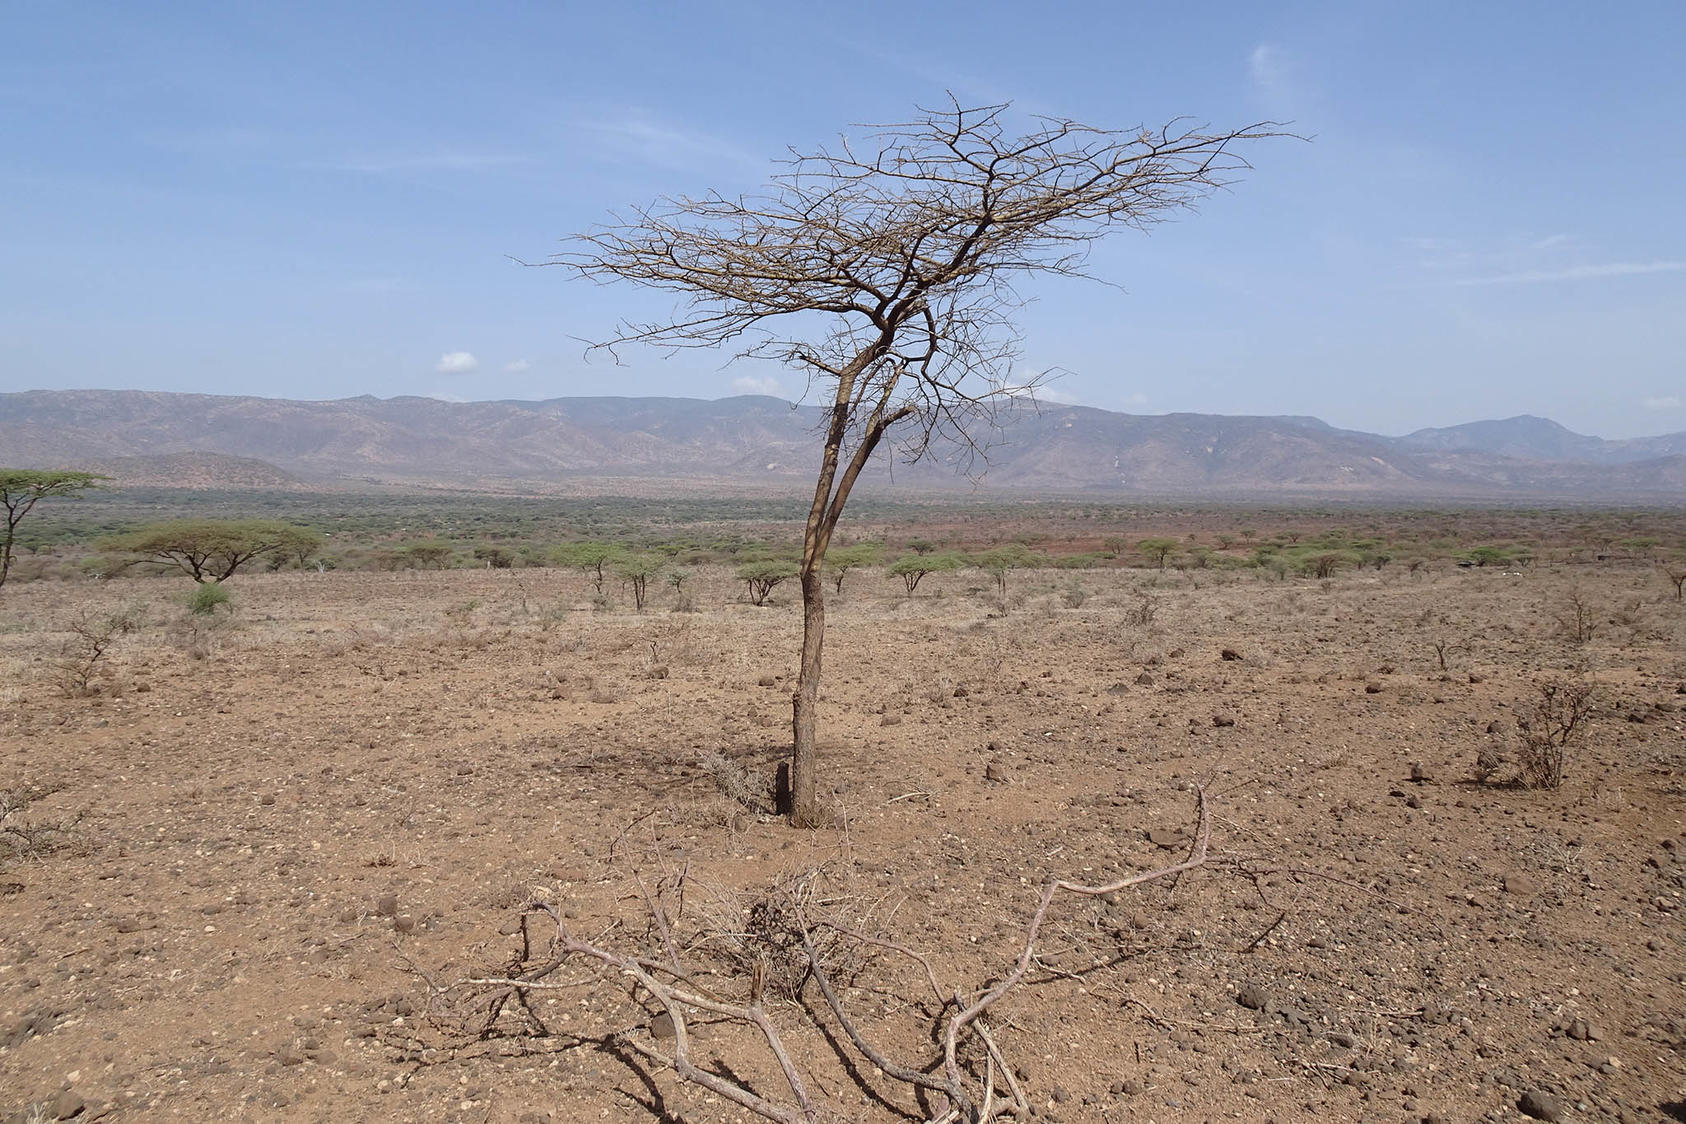 Laikipia is among Kenya’s northern counties where increasing droughts have dried grazing lands, pushing communities into conflict over pasturage and water. A Laikipia-based group, IMPACT, has been leading efforts to halt bloodshed and build peace.